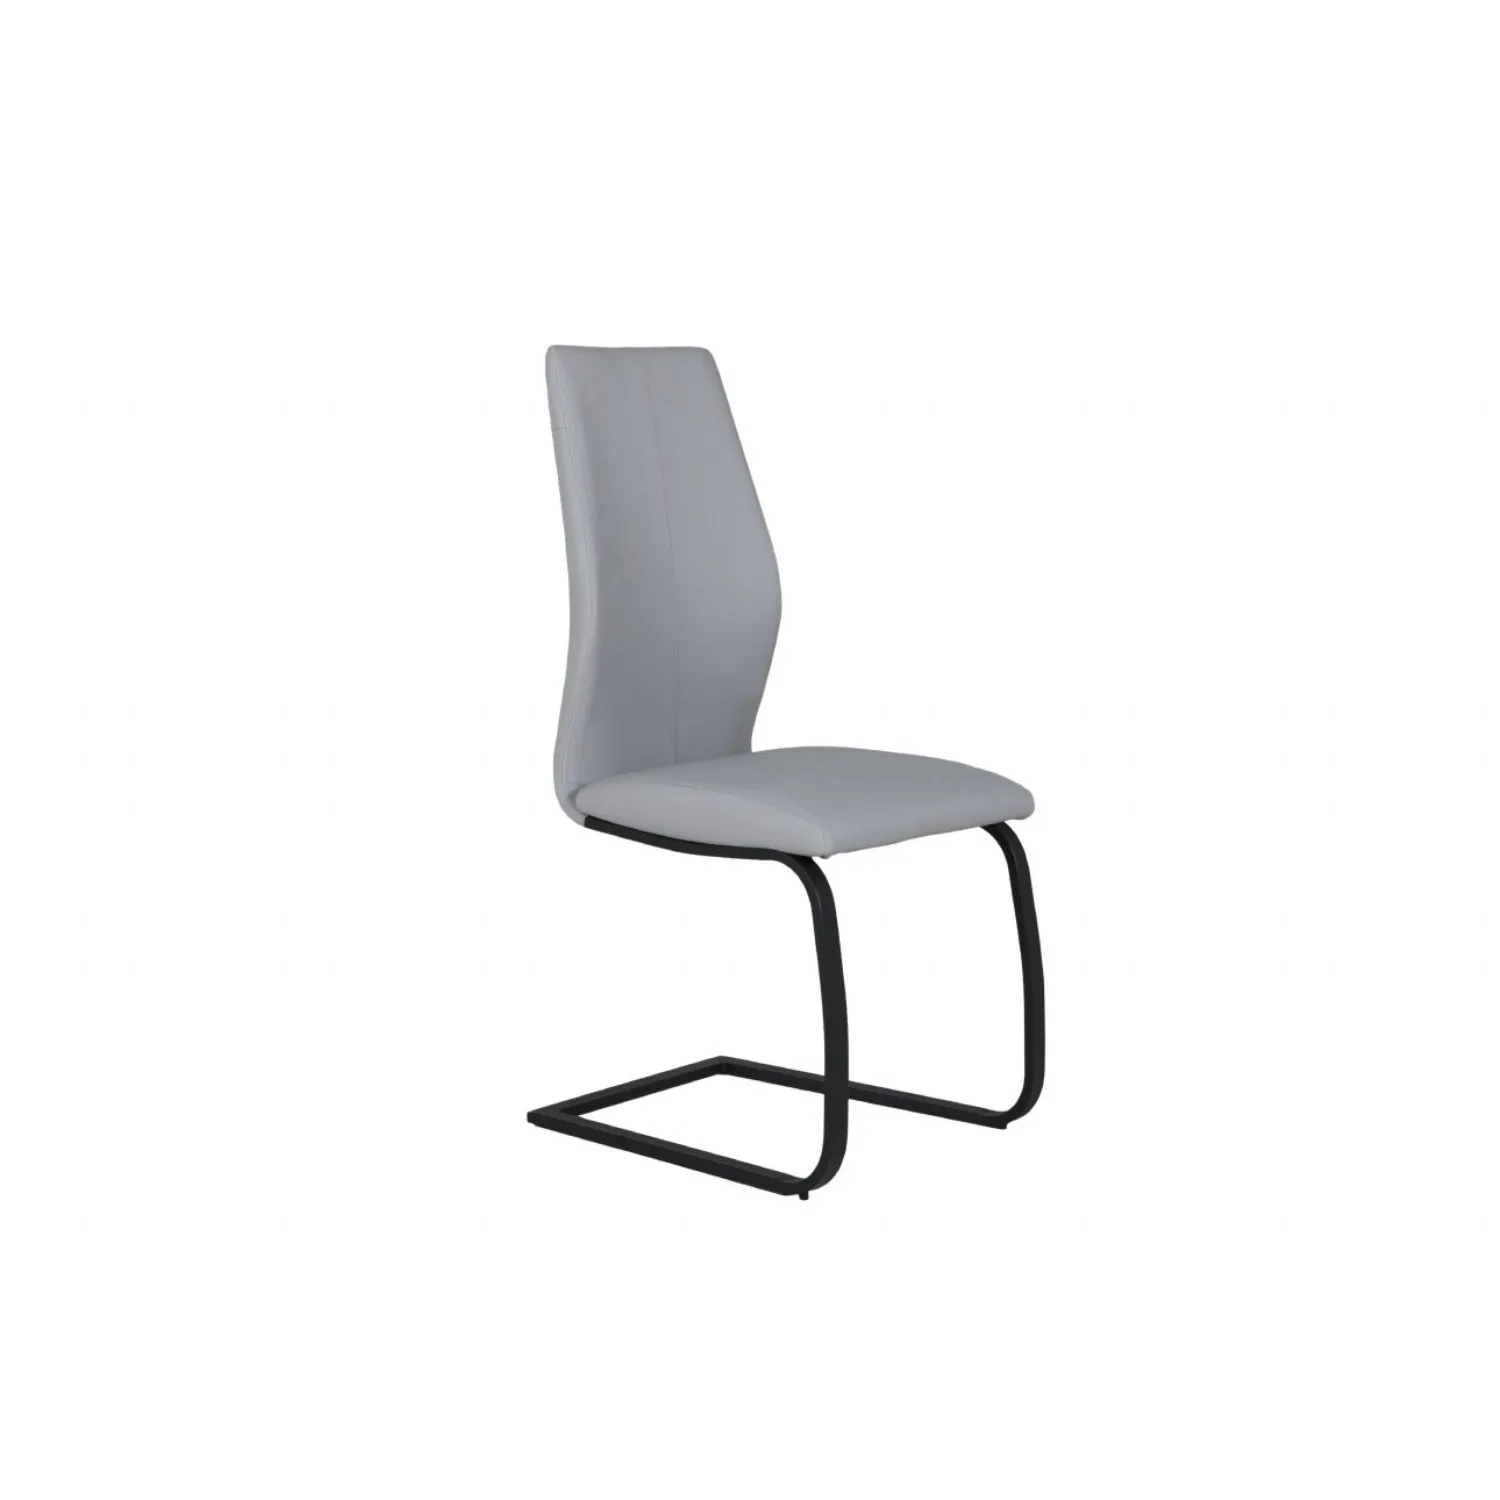 Grey PU Leather Dining Chair Cantilever Metal Legs